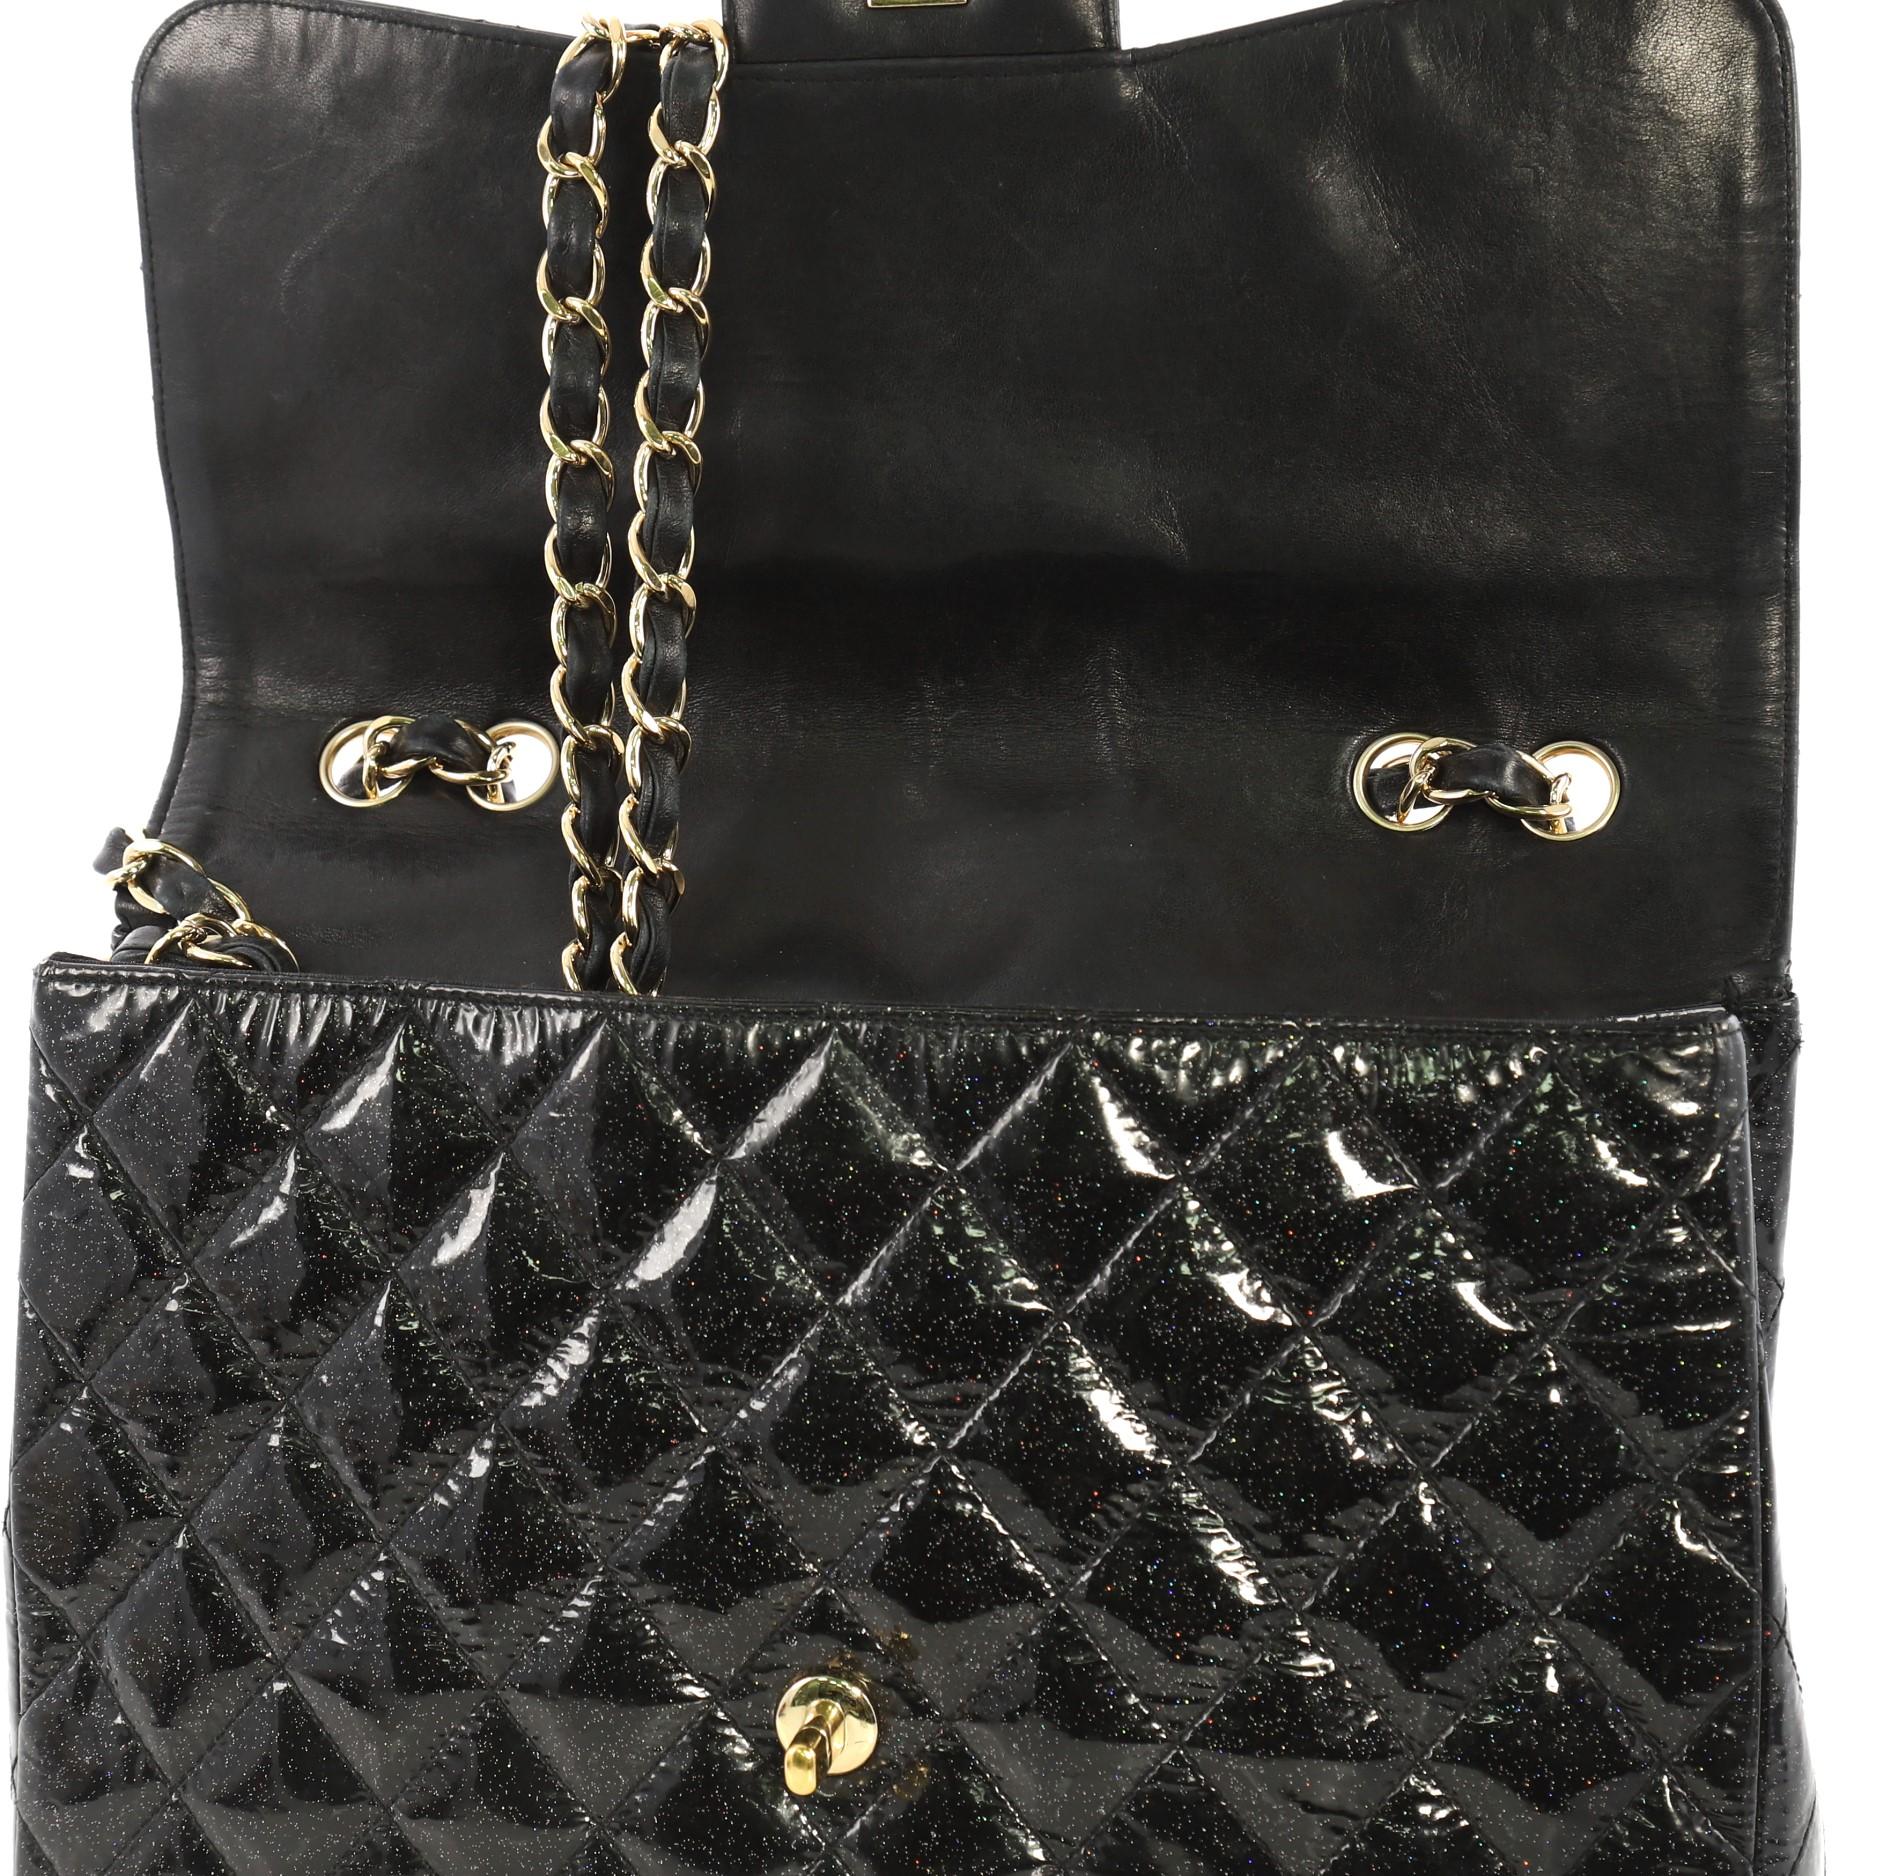 Black Chanel Vintage Classic Single Flap Bag Quilted Glitter Patent Jumbo